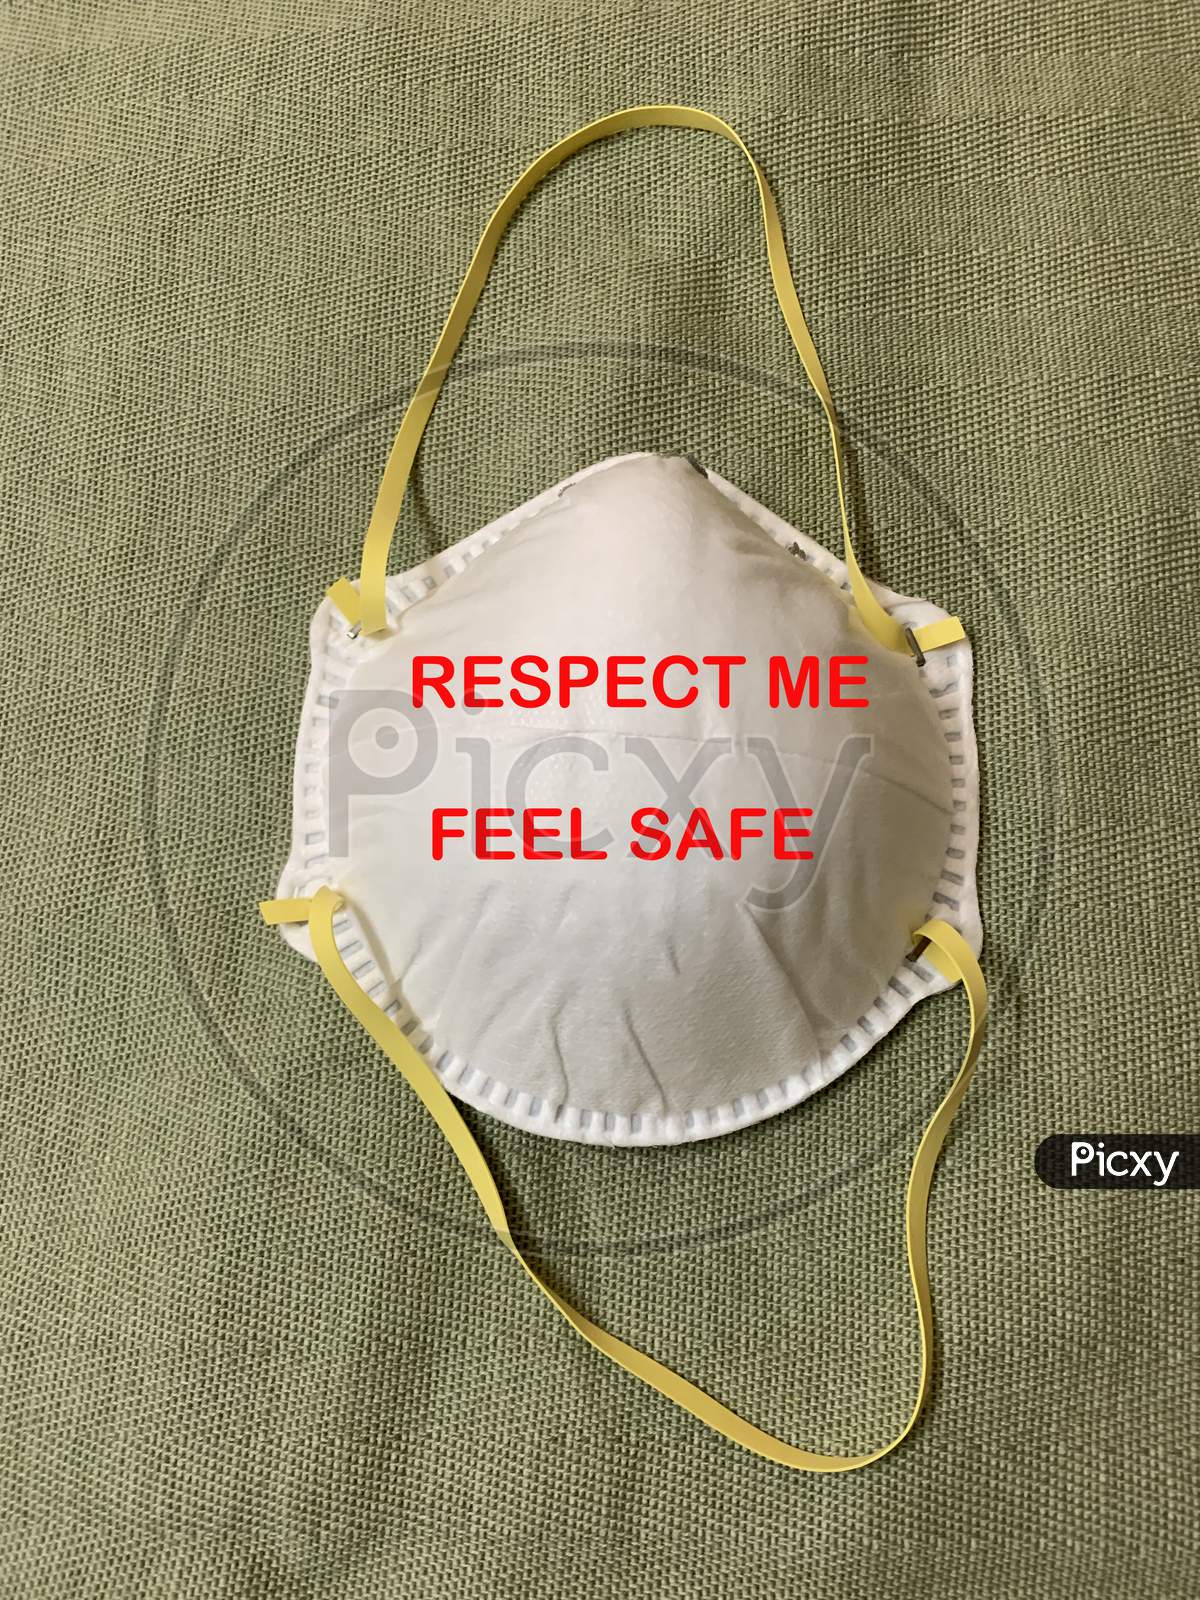 Respect mask and feel safe